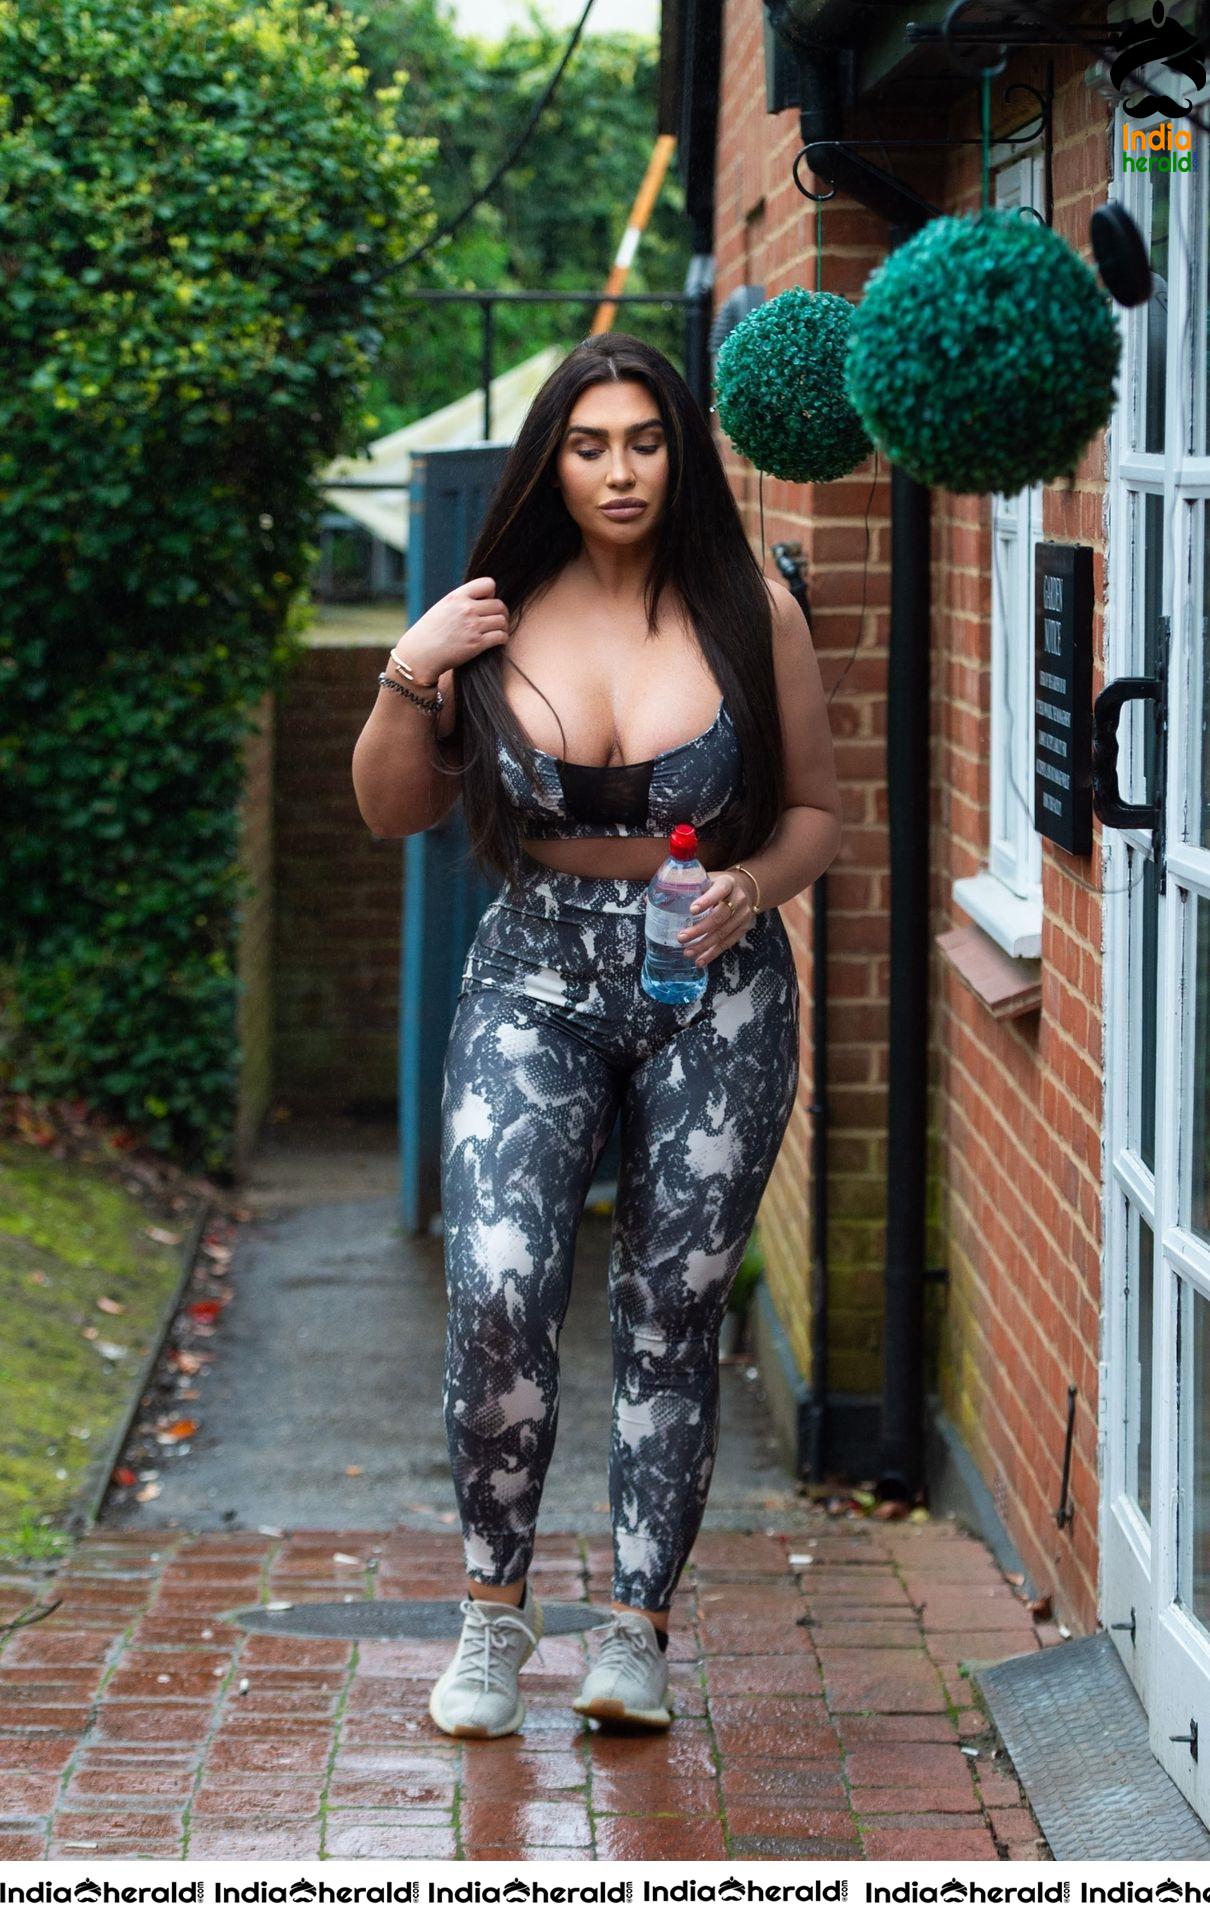 Lauren Goodger flaunts her Big assets as she head out for an exercise session